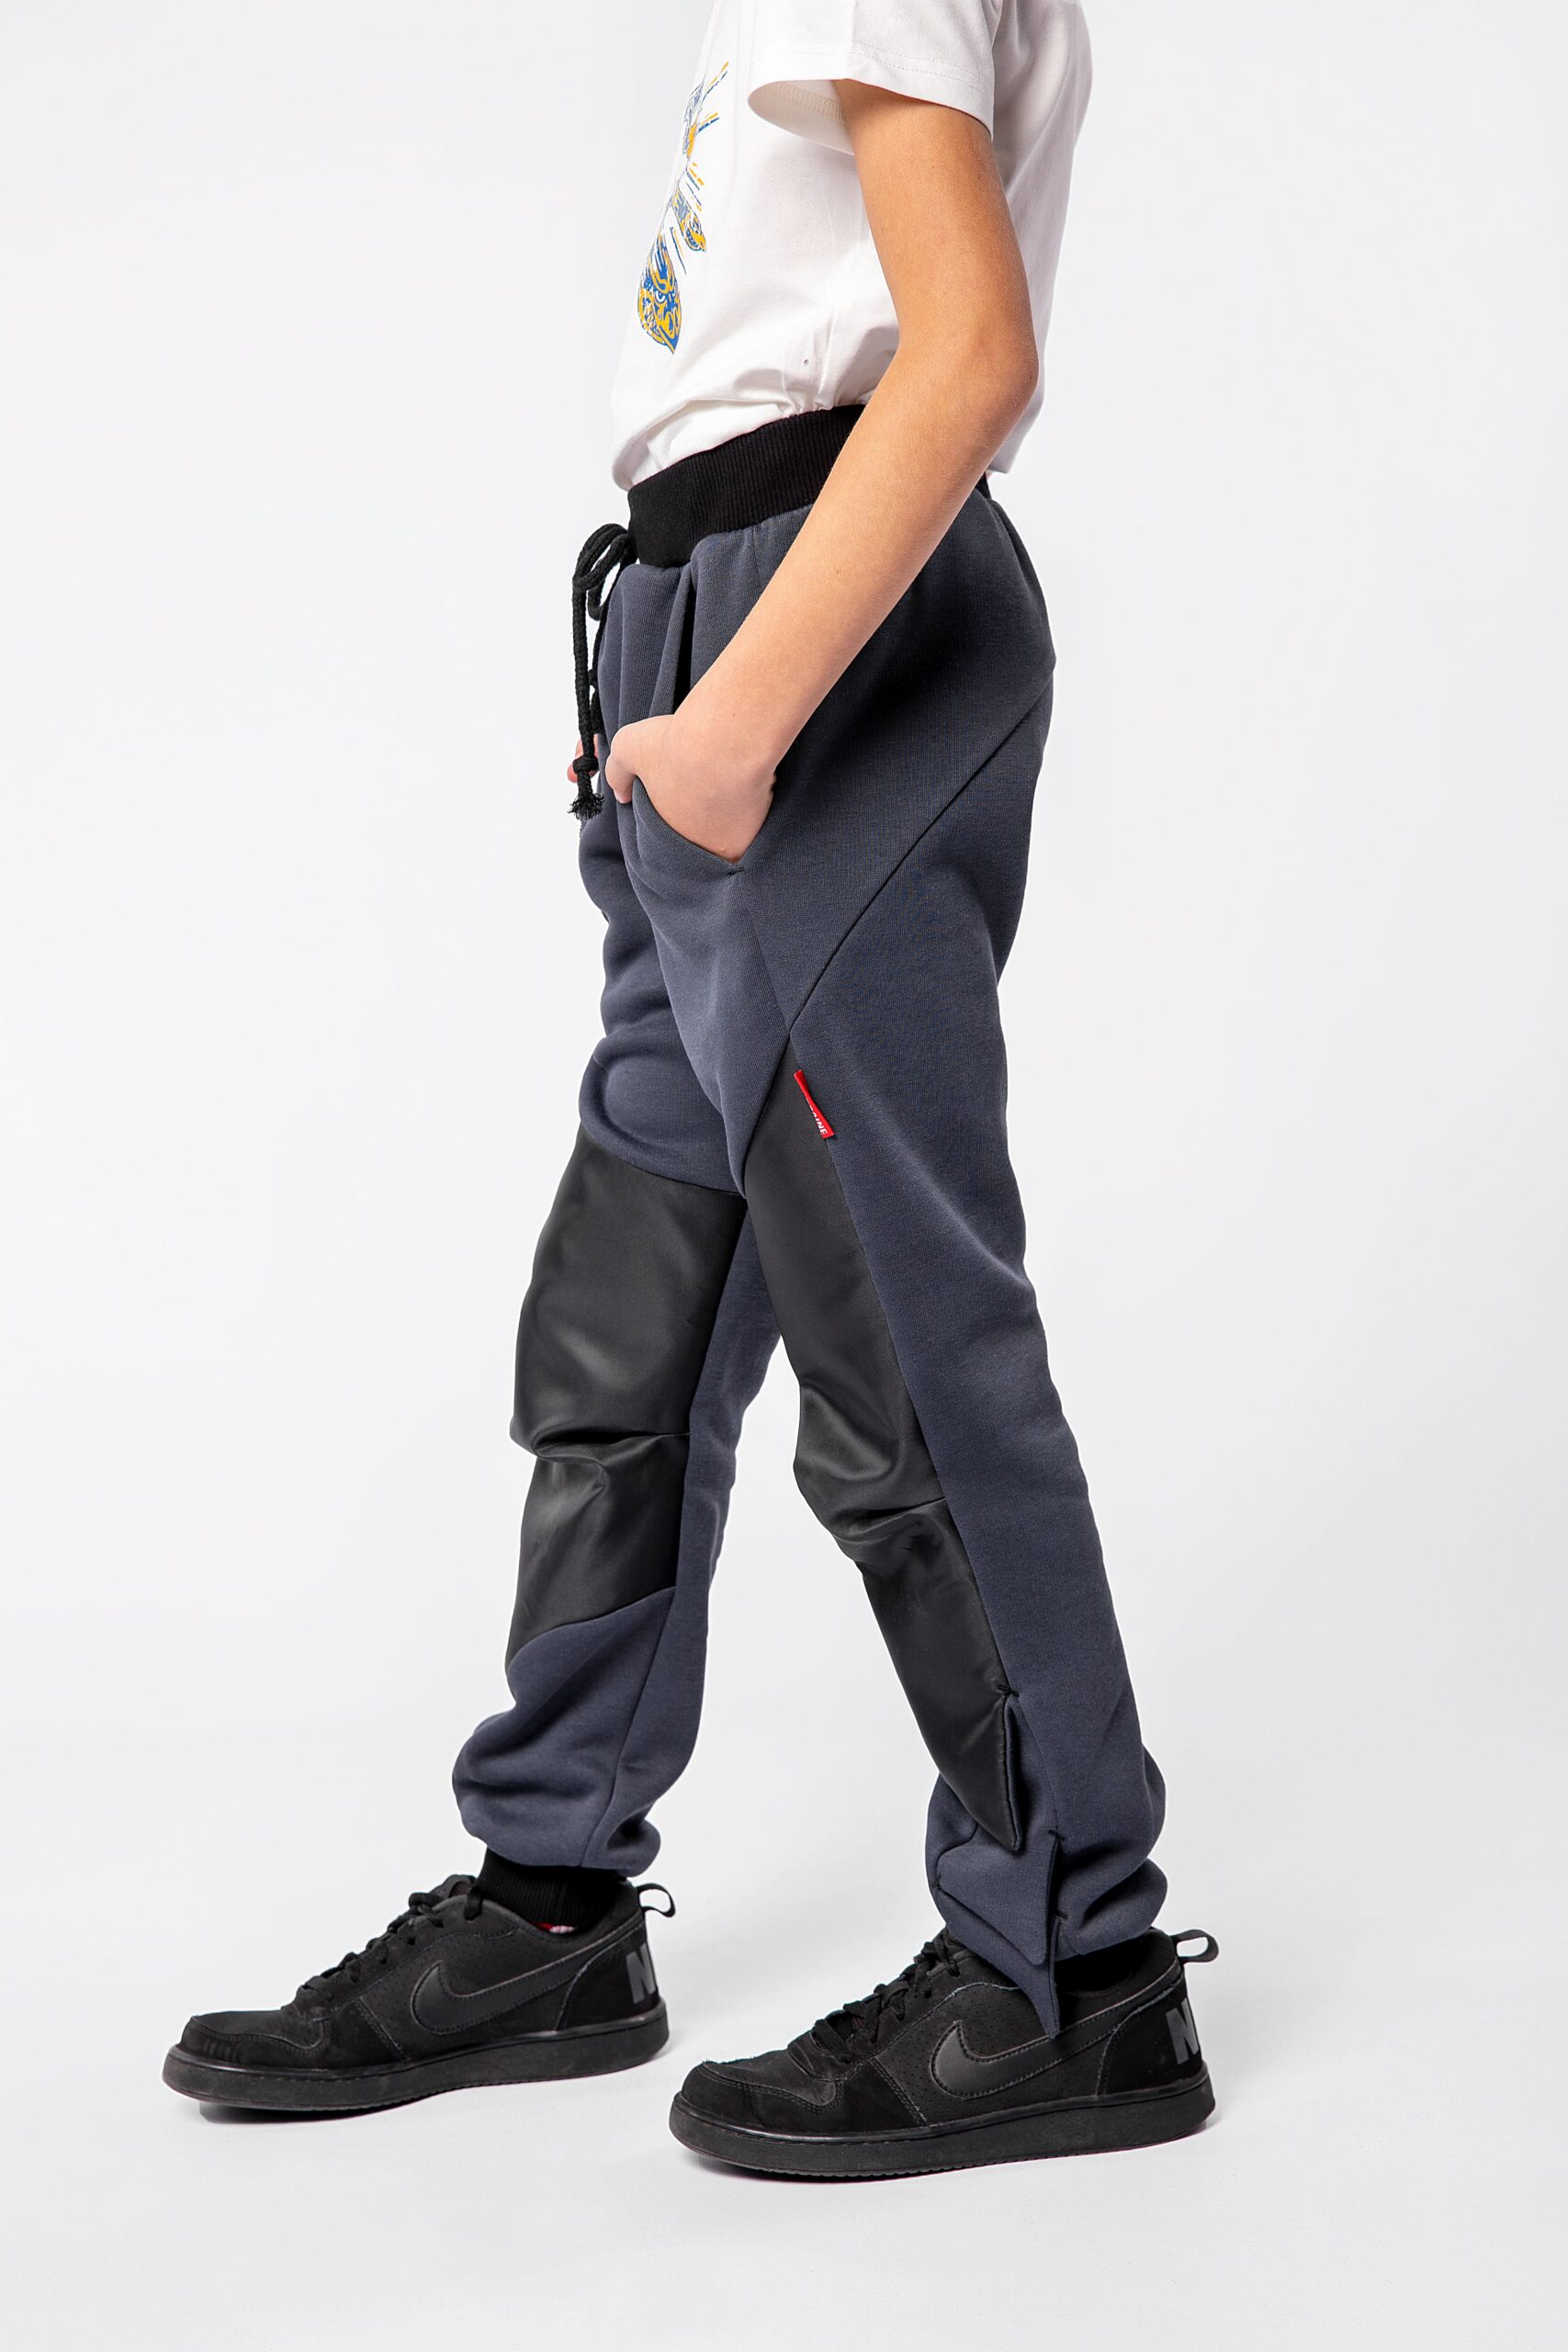 Kids Pants Always Explore. Color graphite. 
Material of the inserts: raincoat fabric.